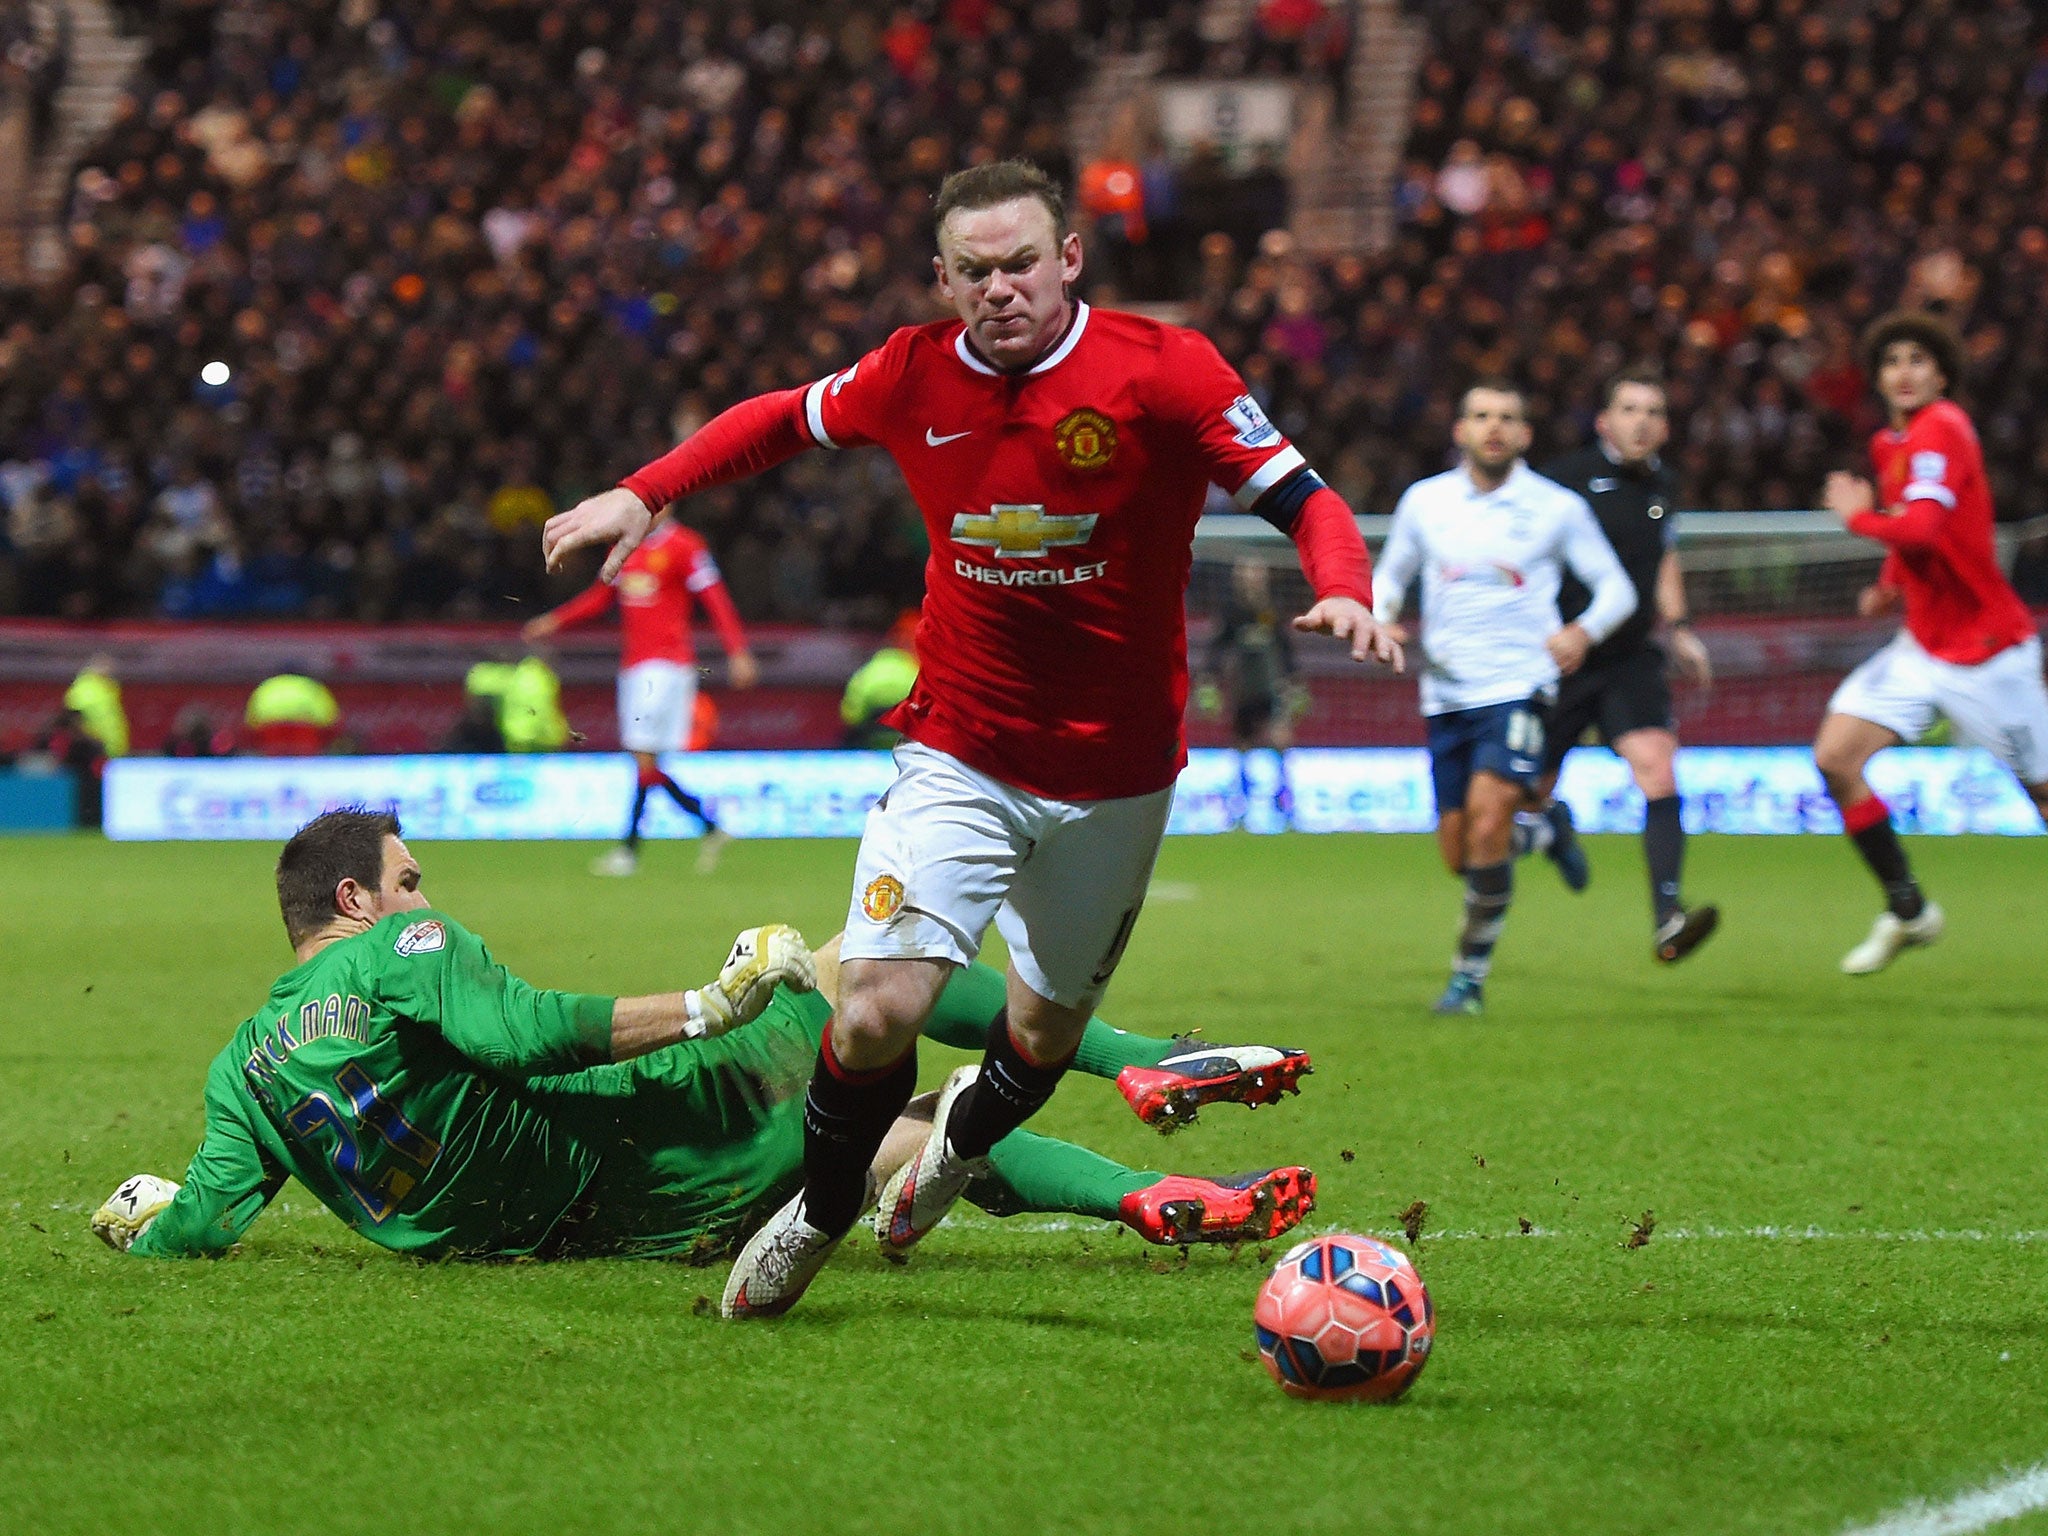 Wayne Rooney wins a penalty after going down under the challenge of Thorsten Stuckmann